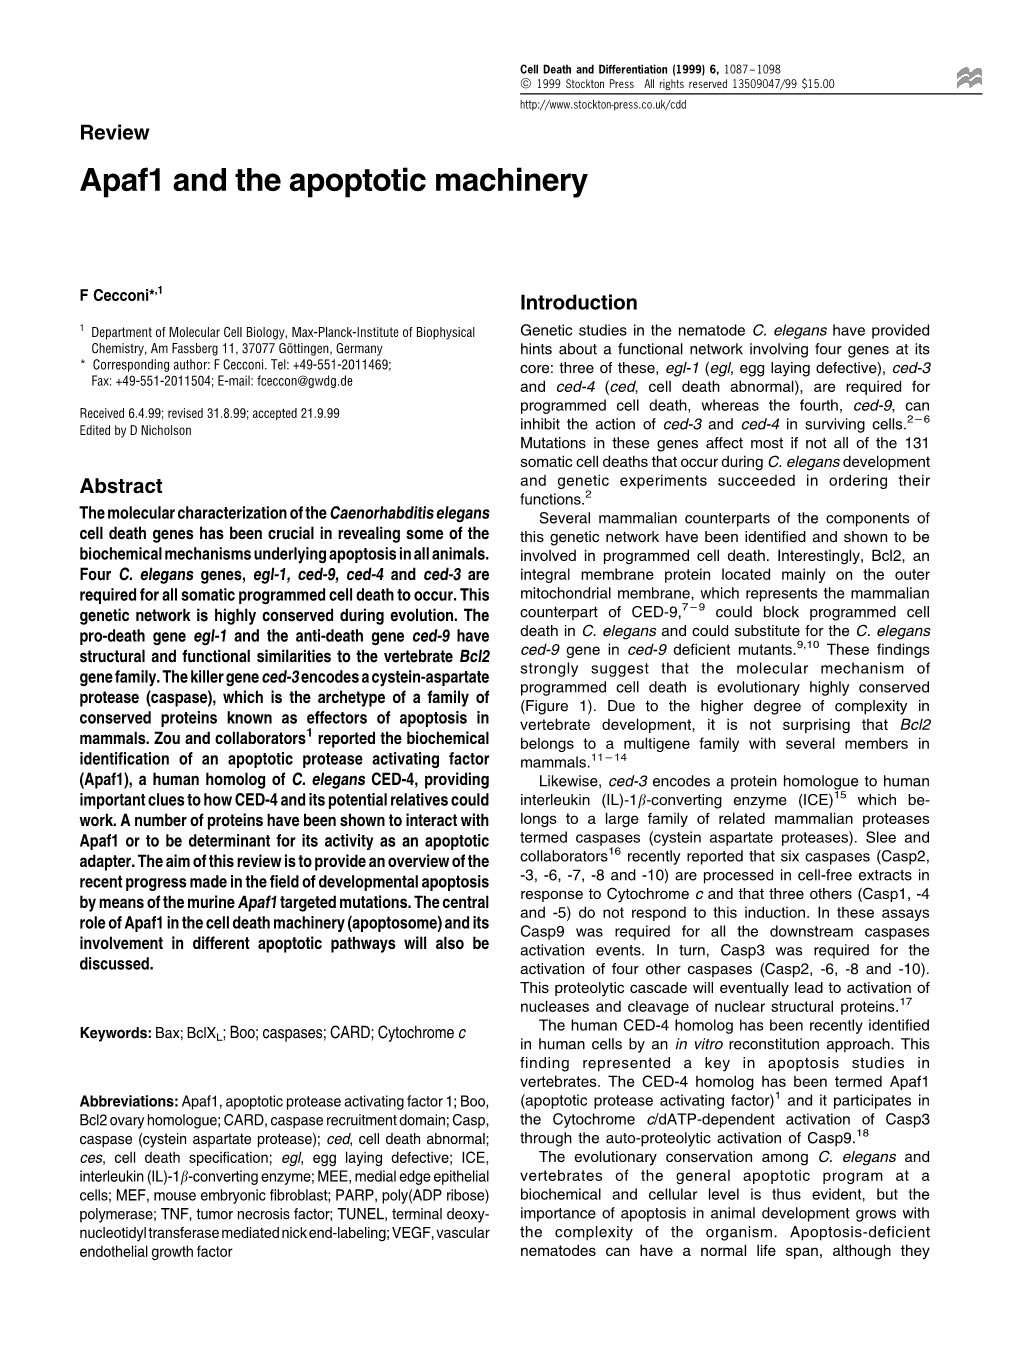 Apaf1 and the Apoptotic Machinery